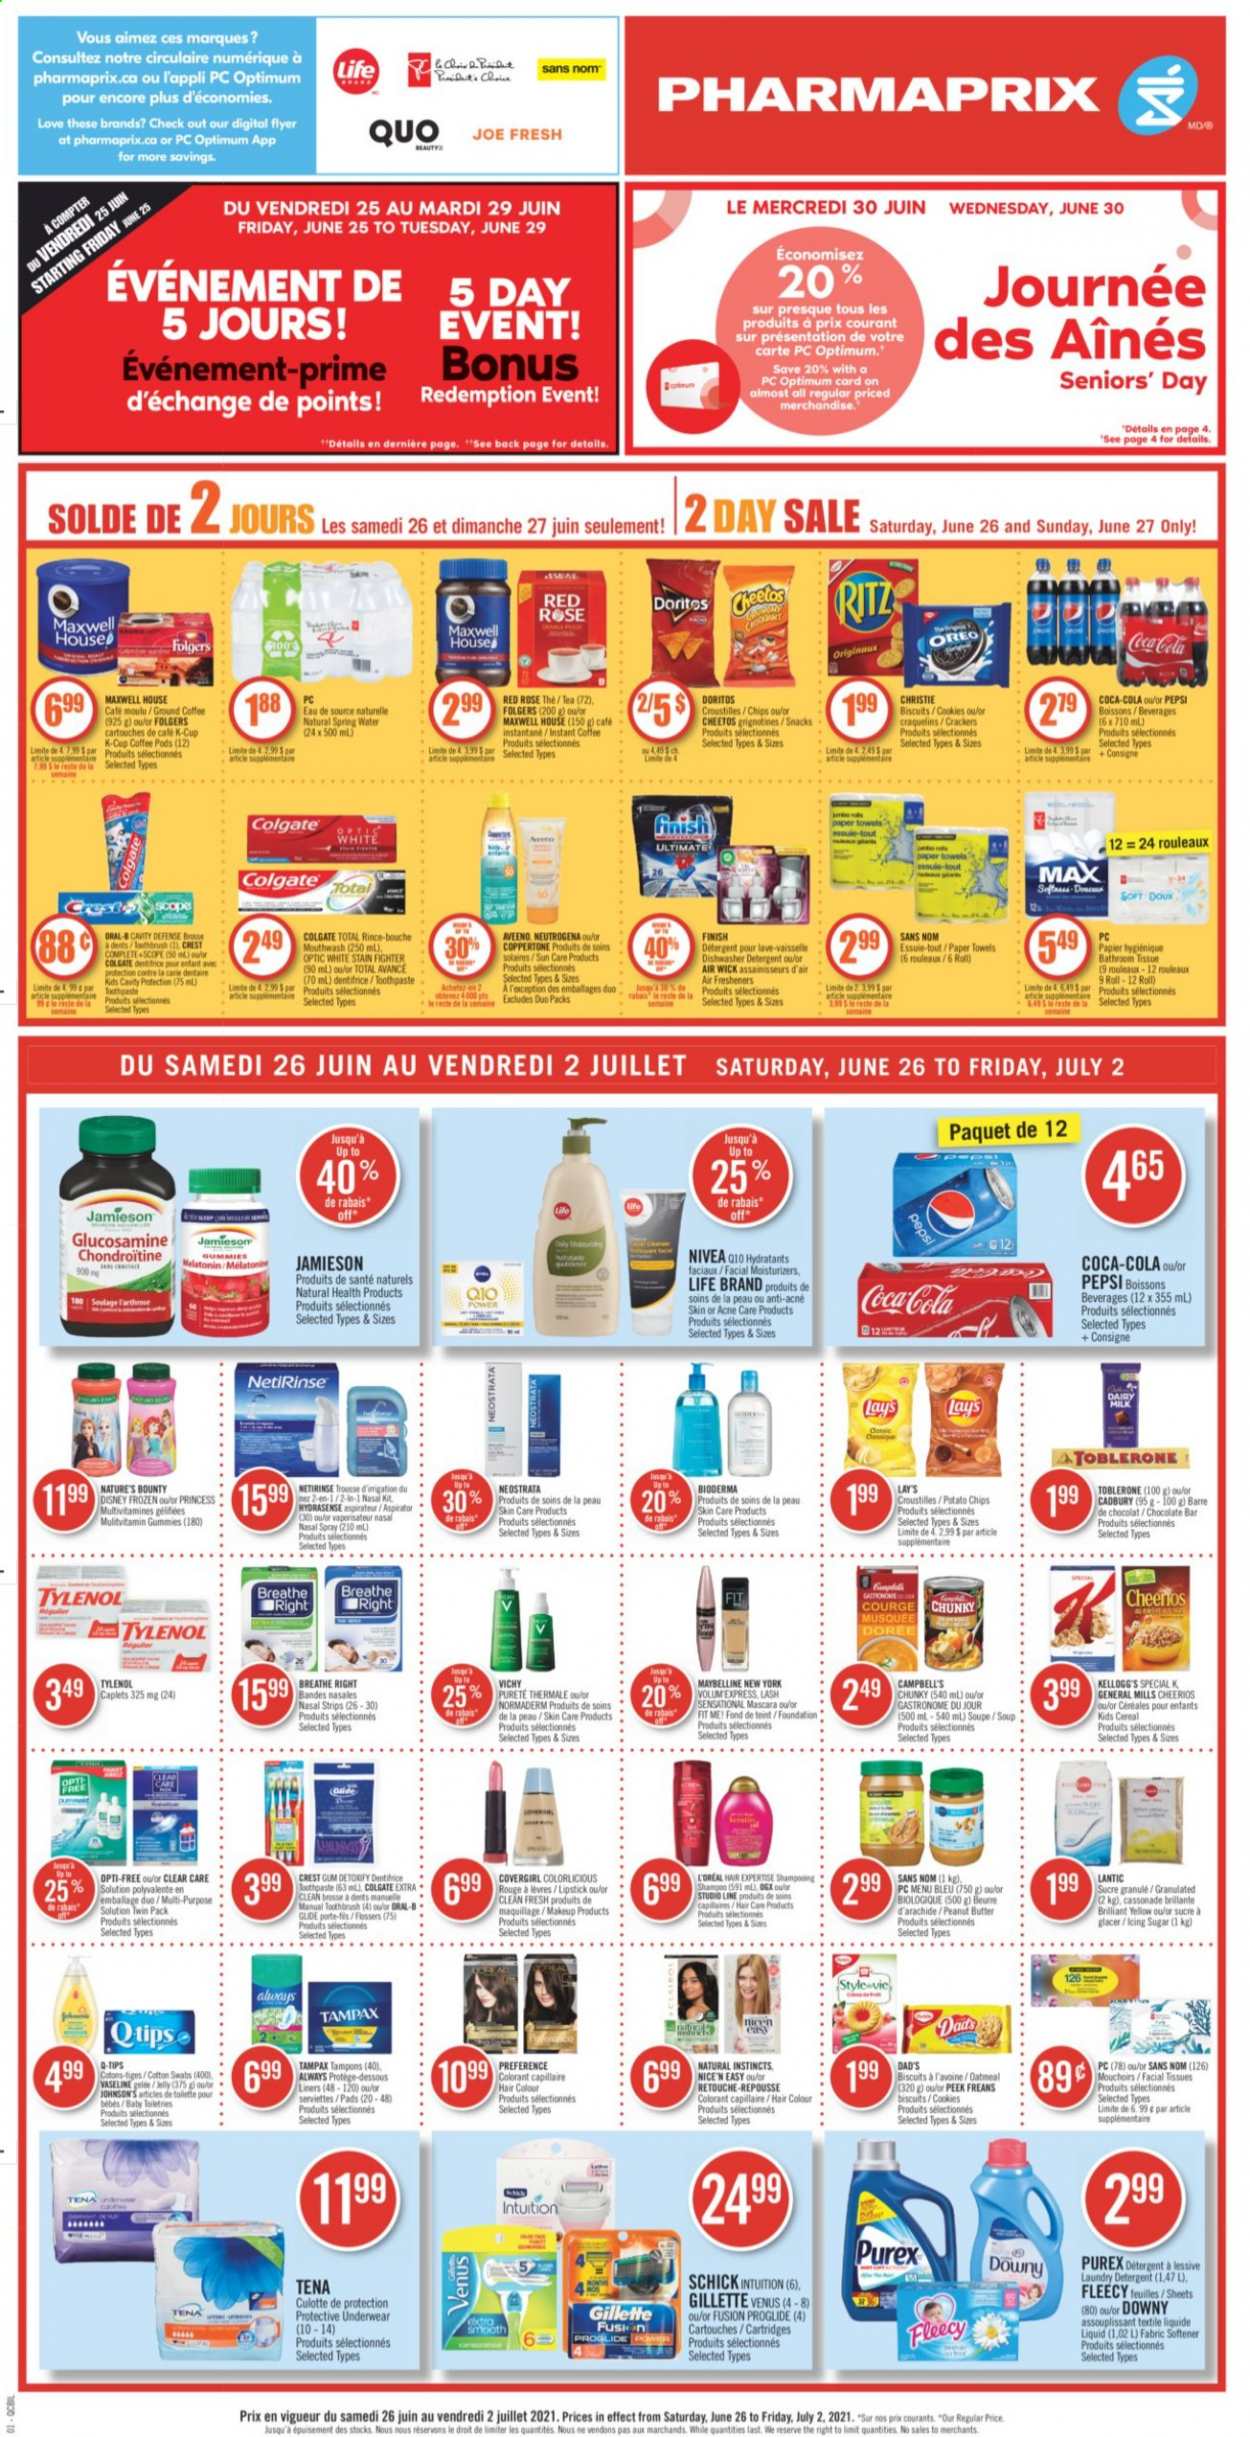 thumbnail - Pharmaprix Flyer - June 26, 2021 - July 02, 2021 - Sales products - Campbell's, soup, Disney, cookies, snack, crackers, Kellogg's, biscuit, Toblerone, Cadbury, Dairy Milk, RITZ, chocolate bar, Doritos, potato chips, Cheetos, Lay’s, sugar, oatmeal, icing sugar, cereals, Cheerios, peanut butter, Coca-Cola, Pepsi, spring water, Maxwell House, tea, coffee pods, instant coffee, Folgers, ground coffee, coffee capsules, K-Cups, rosé wine, Johnson's, Aveeno, bath tissue, kitchen towels, paper towels, fabric softener, laundry detergent, Purex, Vichy, Vaseline, toothbrush, toothpaste, mouthwash, Crest, tampons, facial tissues, L’Oréal, moisturizer, hair color, Schick, Venus, lipstick, makeup, air freshener, Air Wick, princess, rose, Clear Care, glucosamine, Melatonin, Nature's Bounty, Tylenol, nasal spray, Oreo, Gillette, mascara, Maybelline, Neutrogena, shampoo, Tampax, Nivea, Oral-B. Page 1.